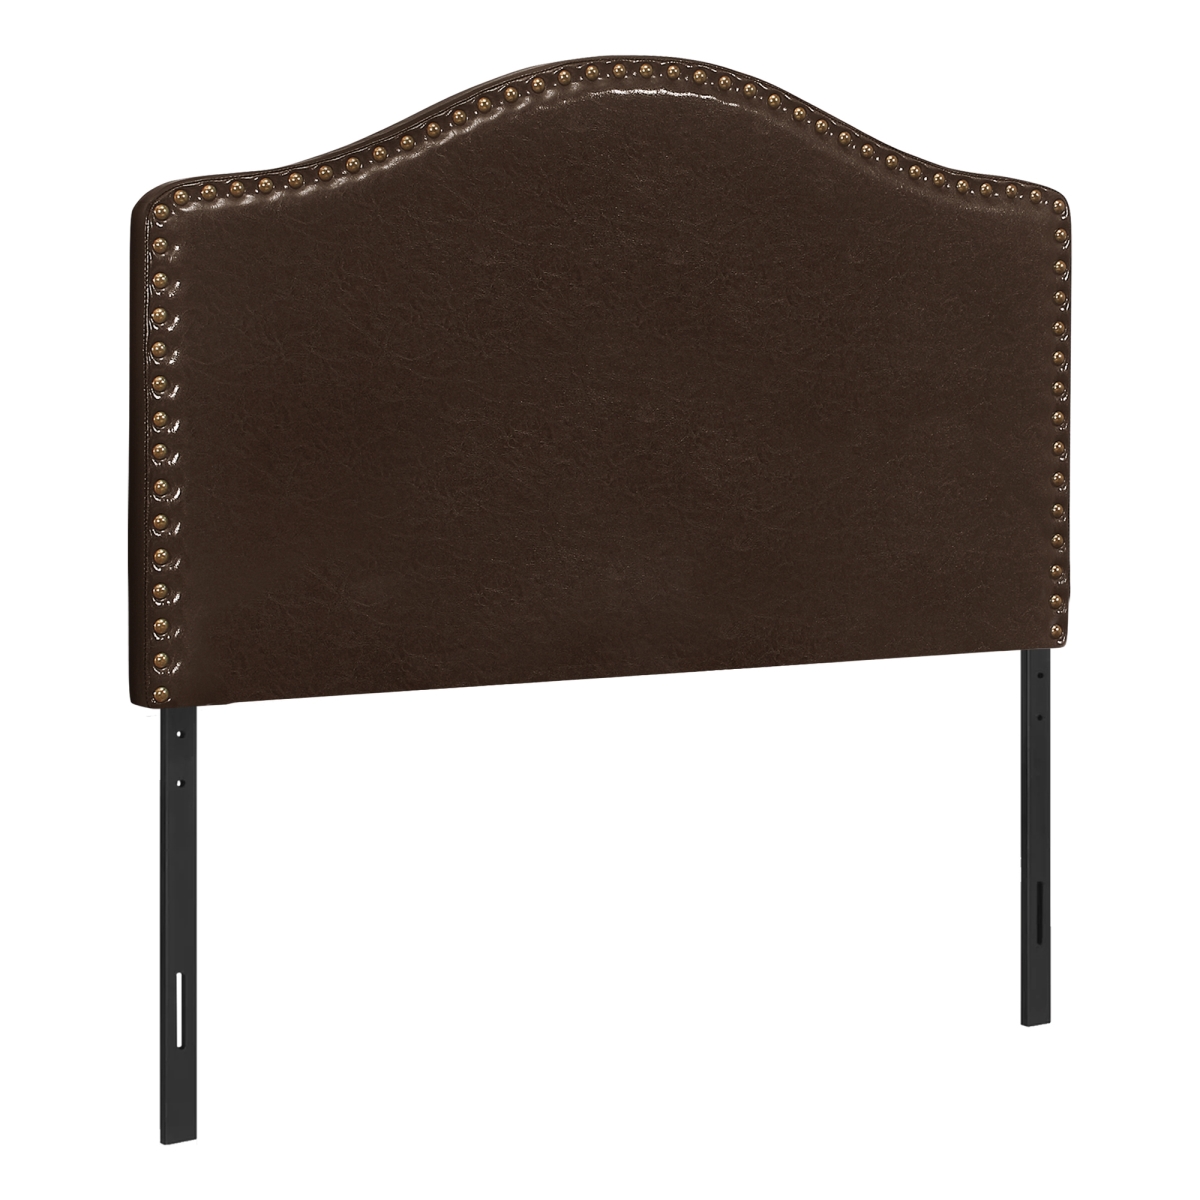 Picture of Monarch Specialties I 6010T 3 in. Leather Hook Headboard Bed - Brown & Black - Twin Size